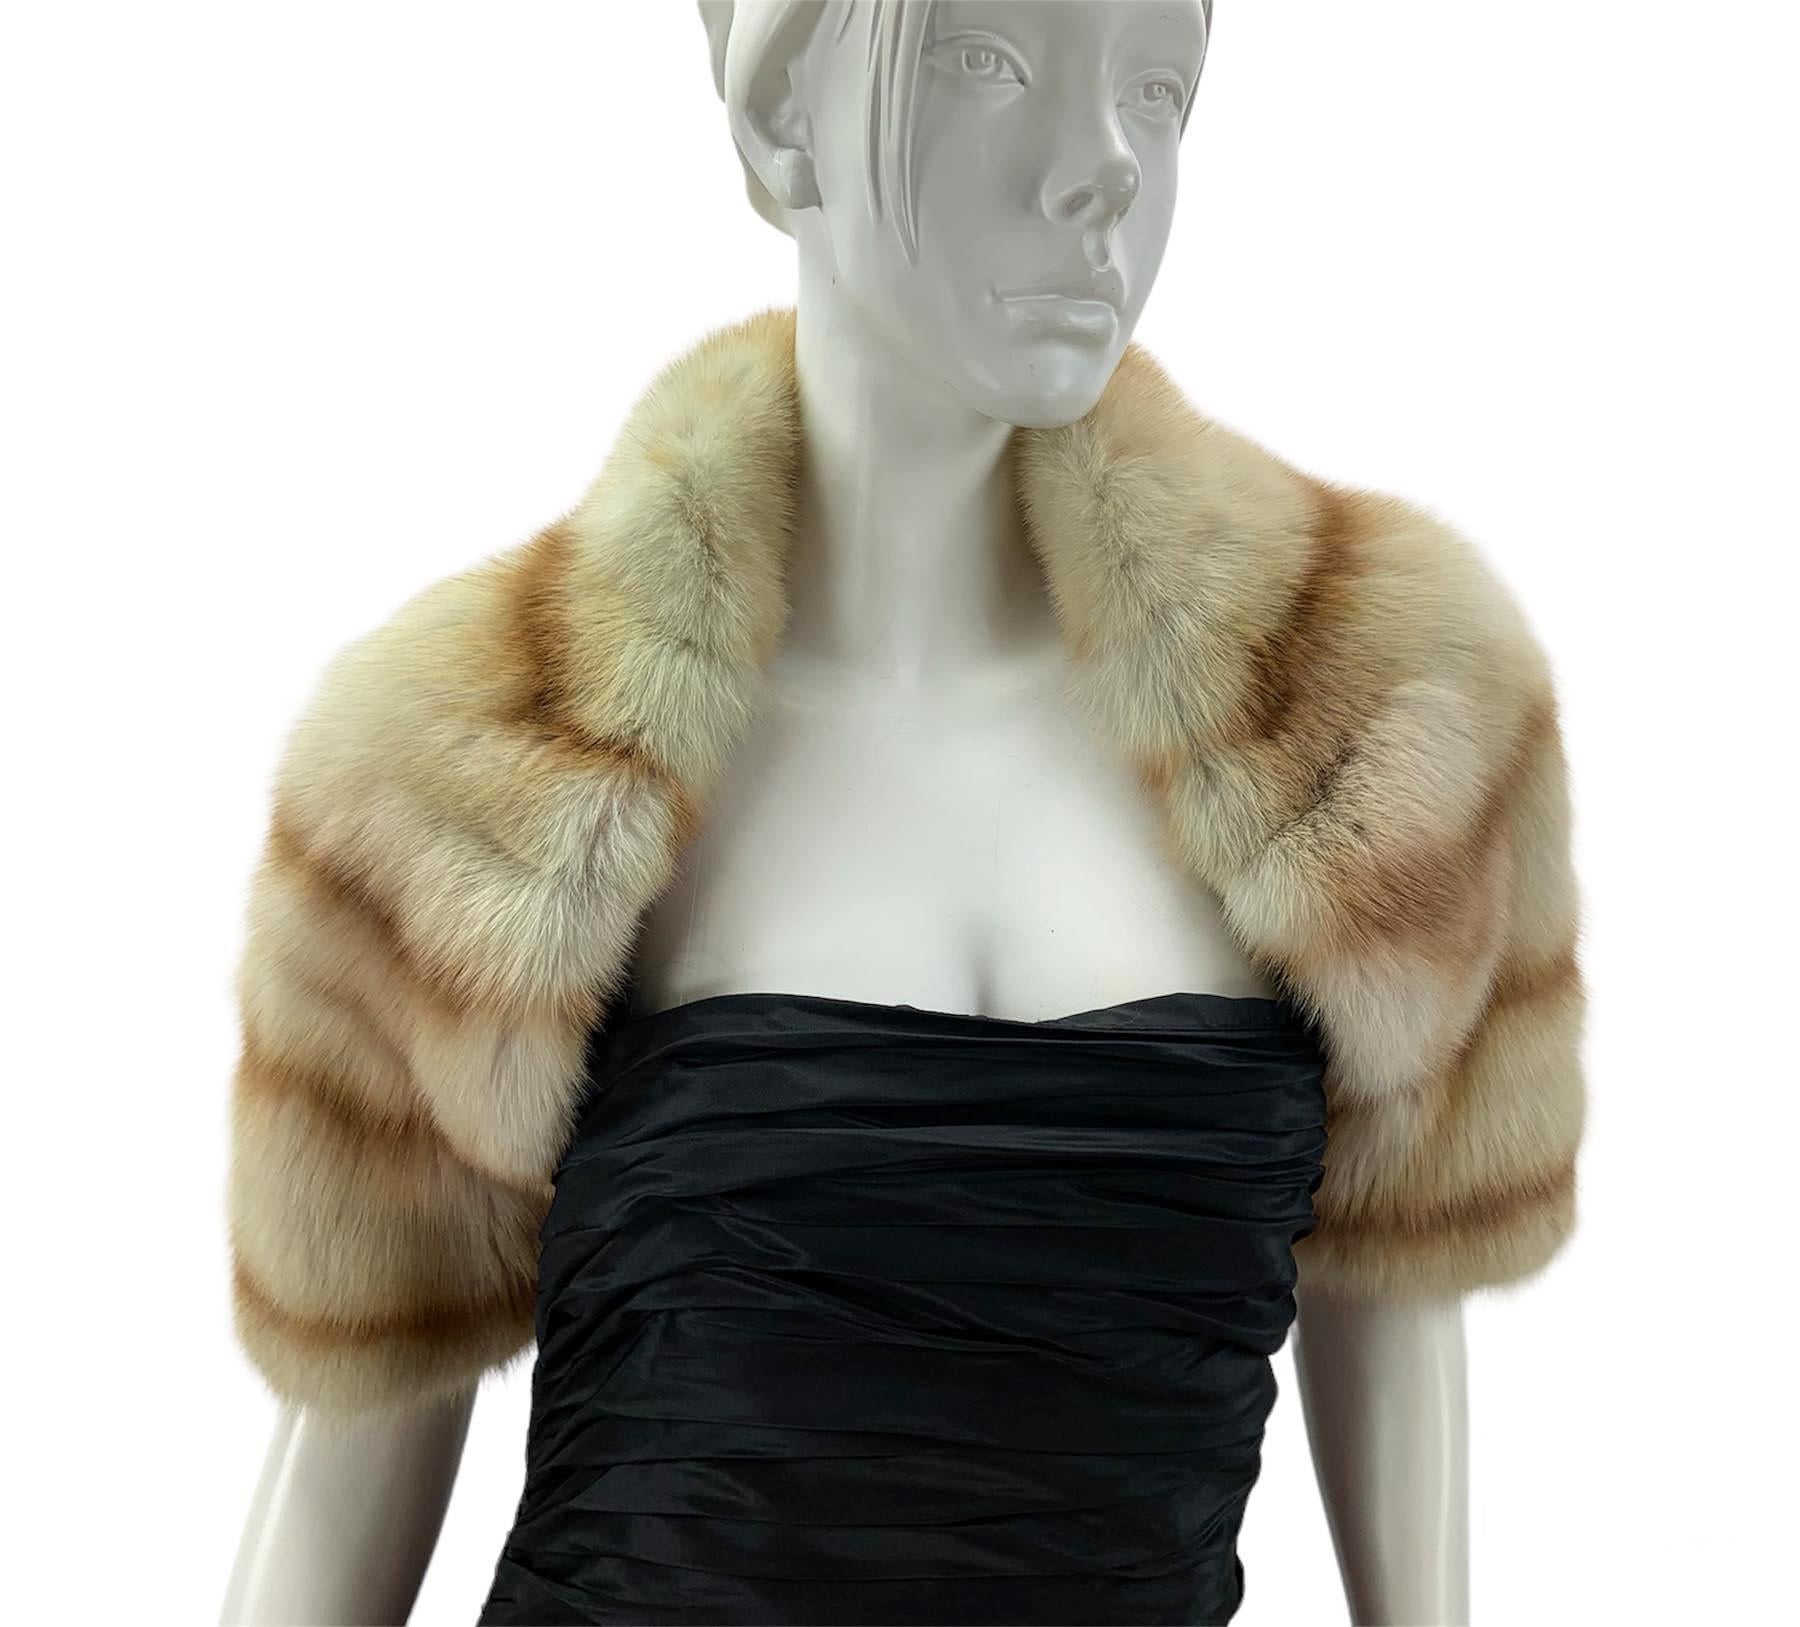 New Oscar de la Renta Russian Sable Bolero Jacket
F/W 2010 Collection
Designer size - M
Russian sable in honey vanilla color, Silky and glossy, Fully lined in silk.
Measurements: Length - 13 inches, Armpit to armpit - up to 17 inches.
Made in